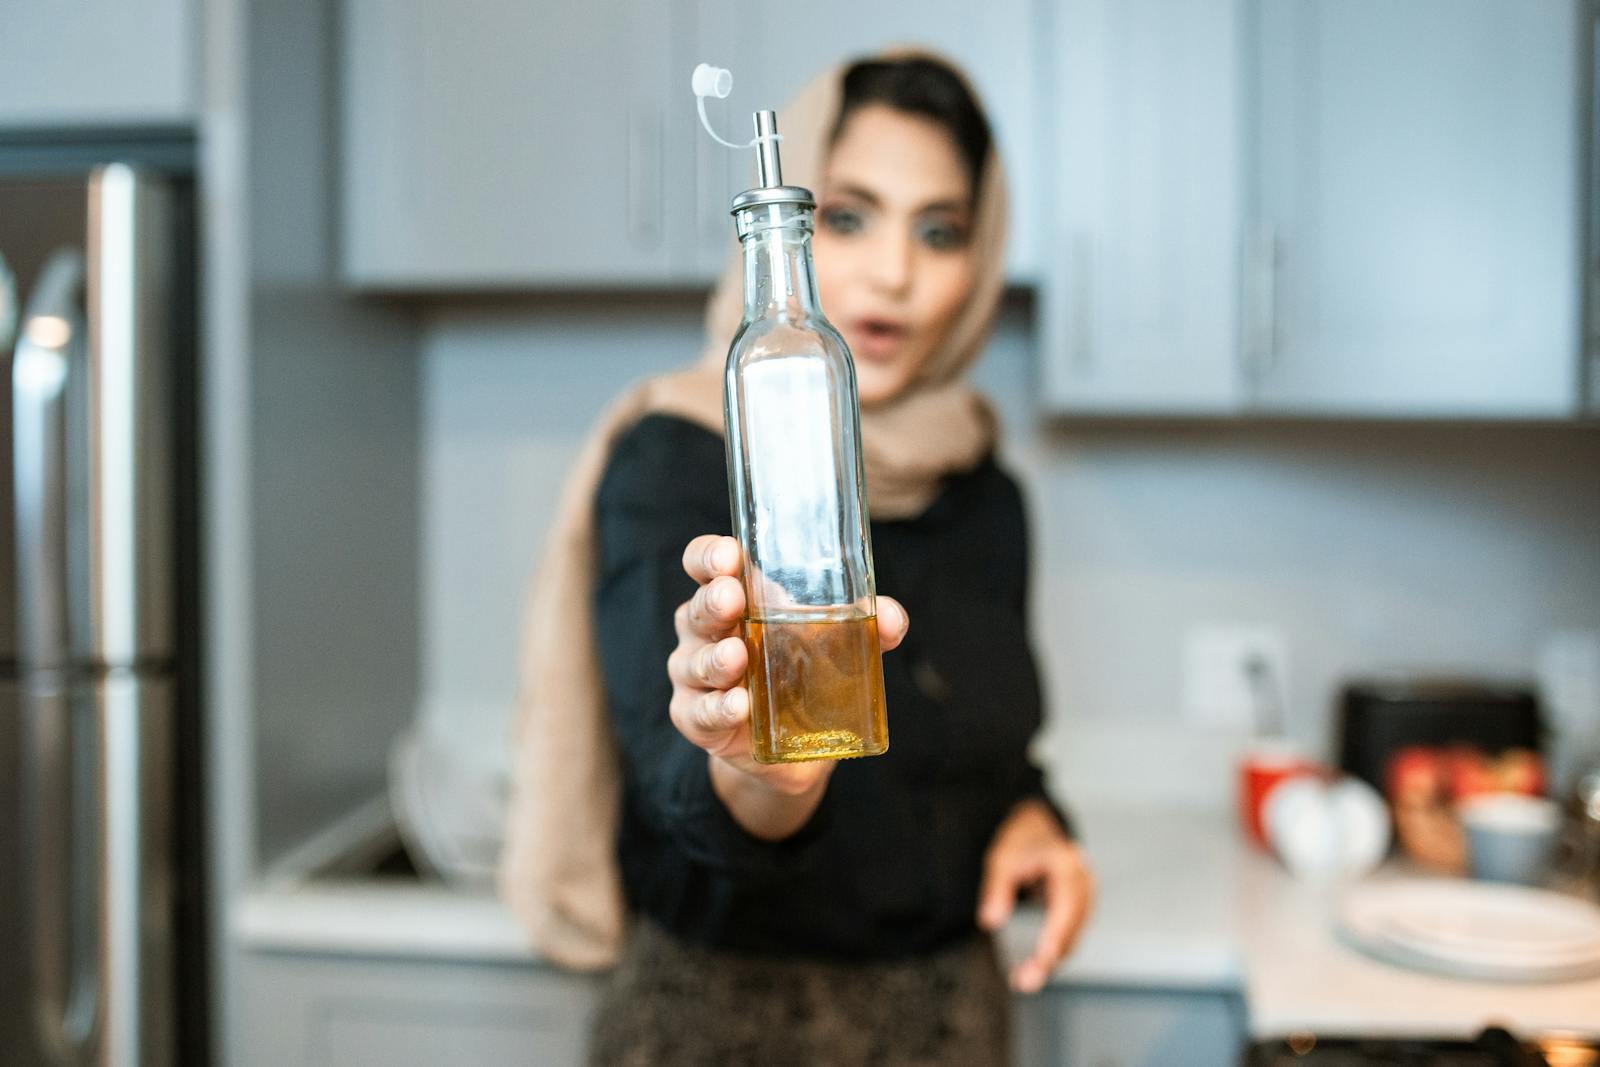 Ethnic woman demonstrating bottle of sunflower oil while cooking